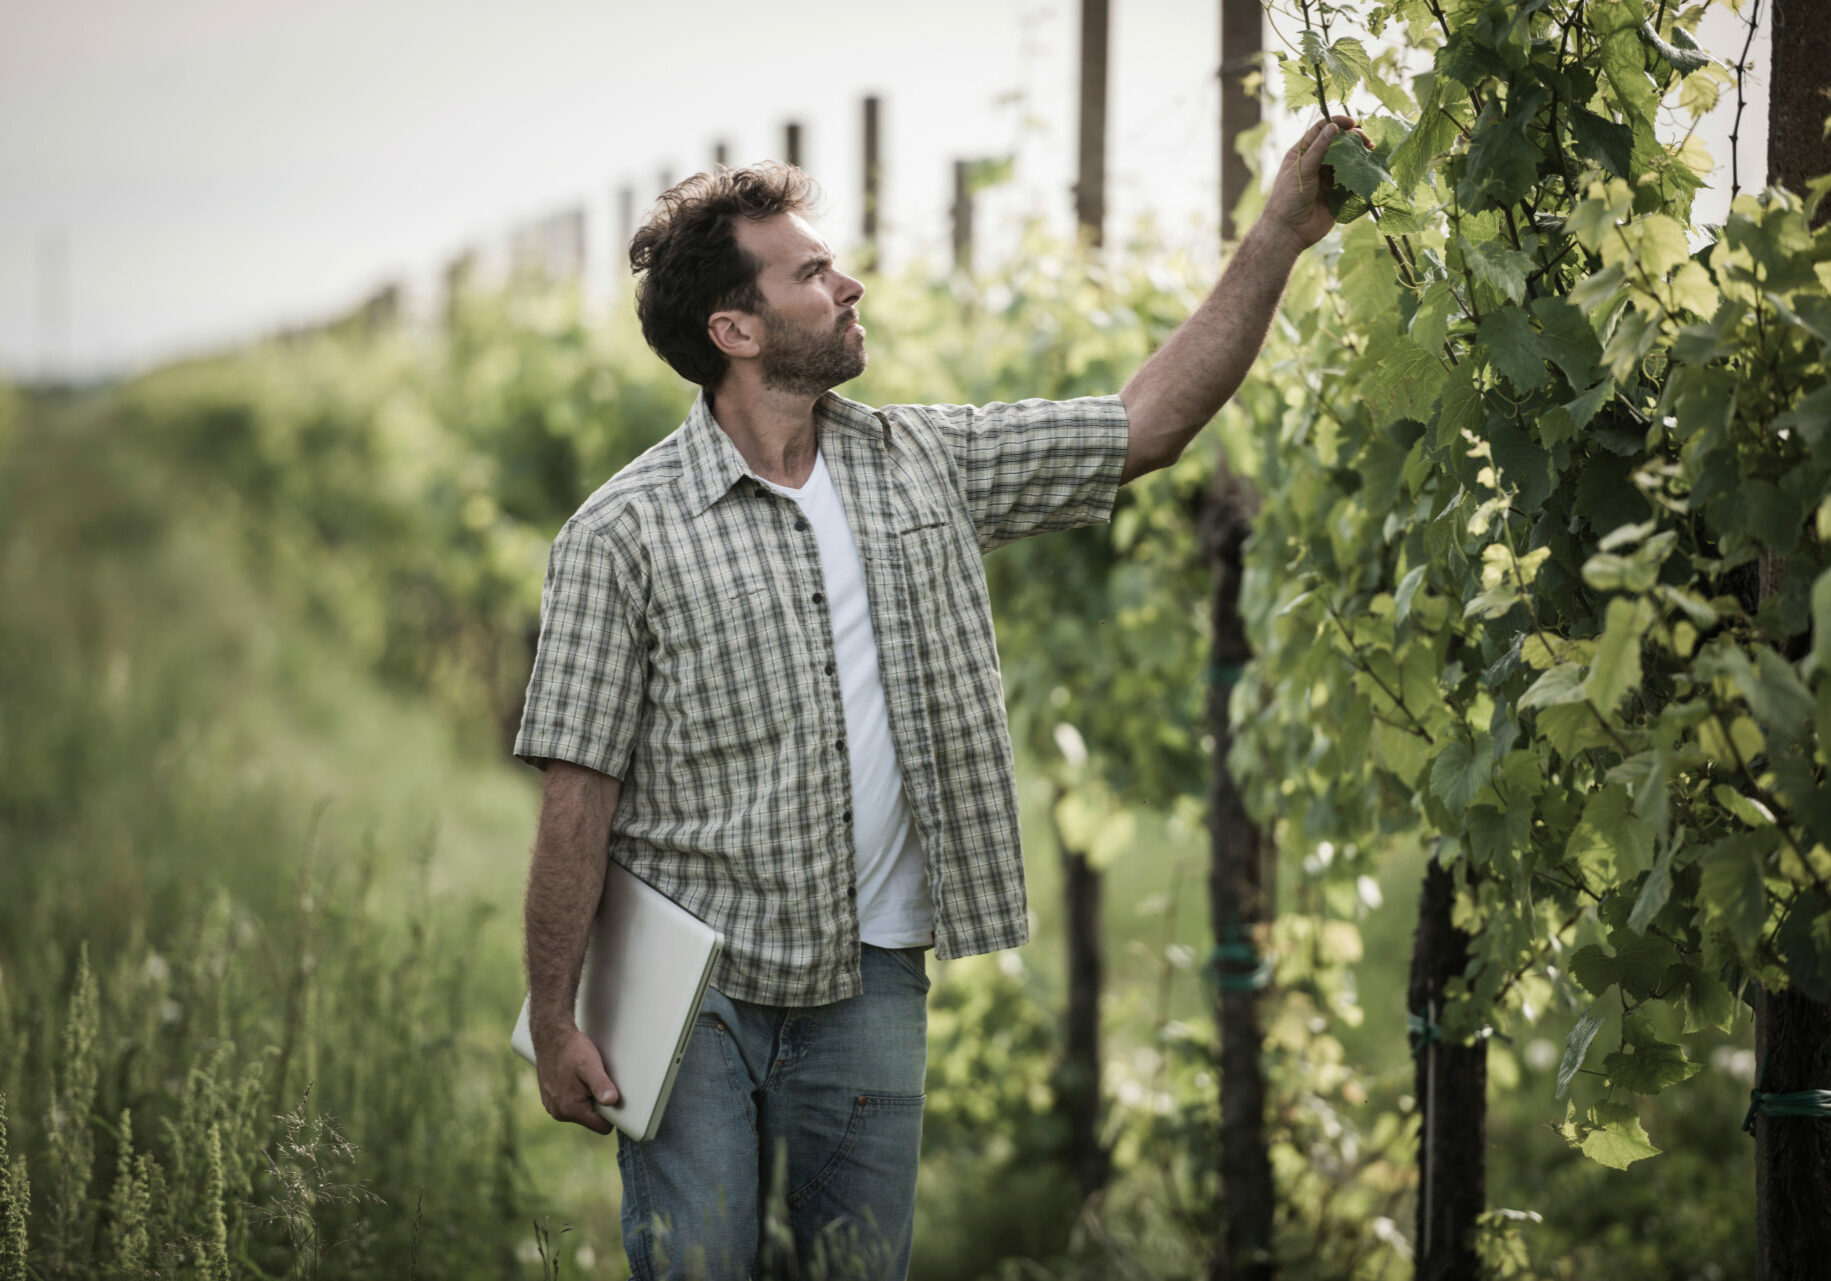 Man inspects grape vines while holding a laptop